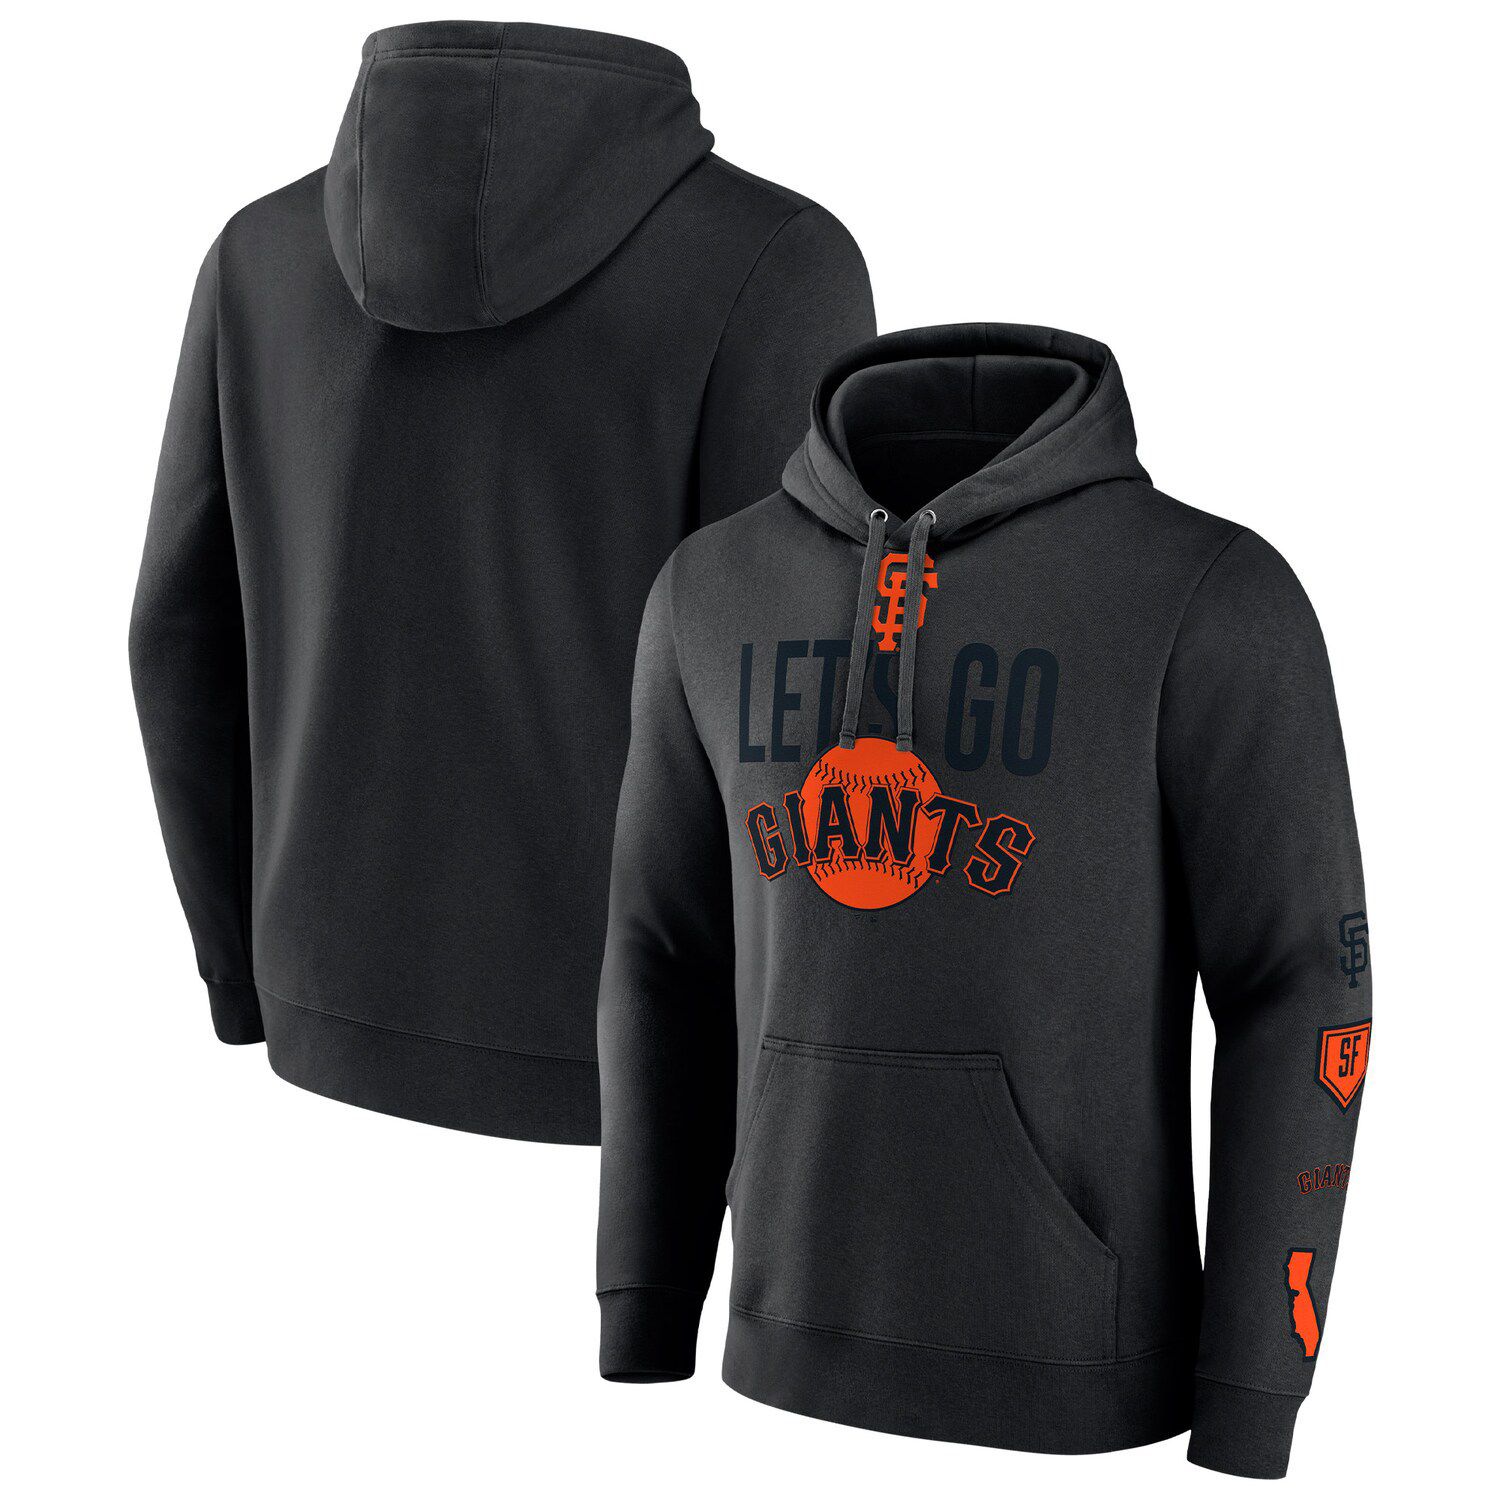 REFRIED APPAREL Women's Refried Apparel White/Black San Francisco Giants  Cropped Pullover Hoodie